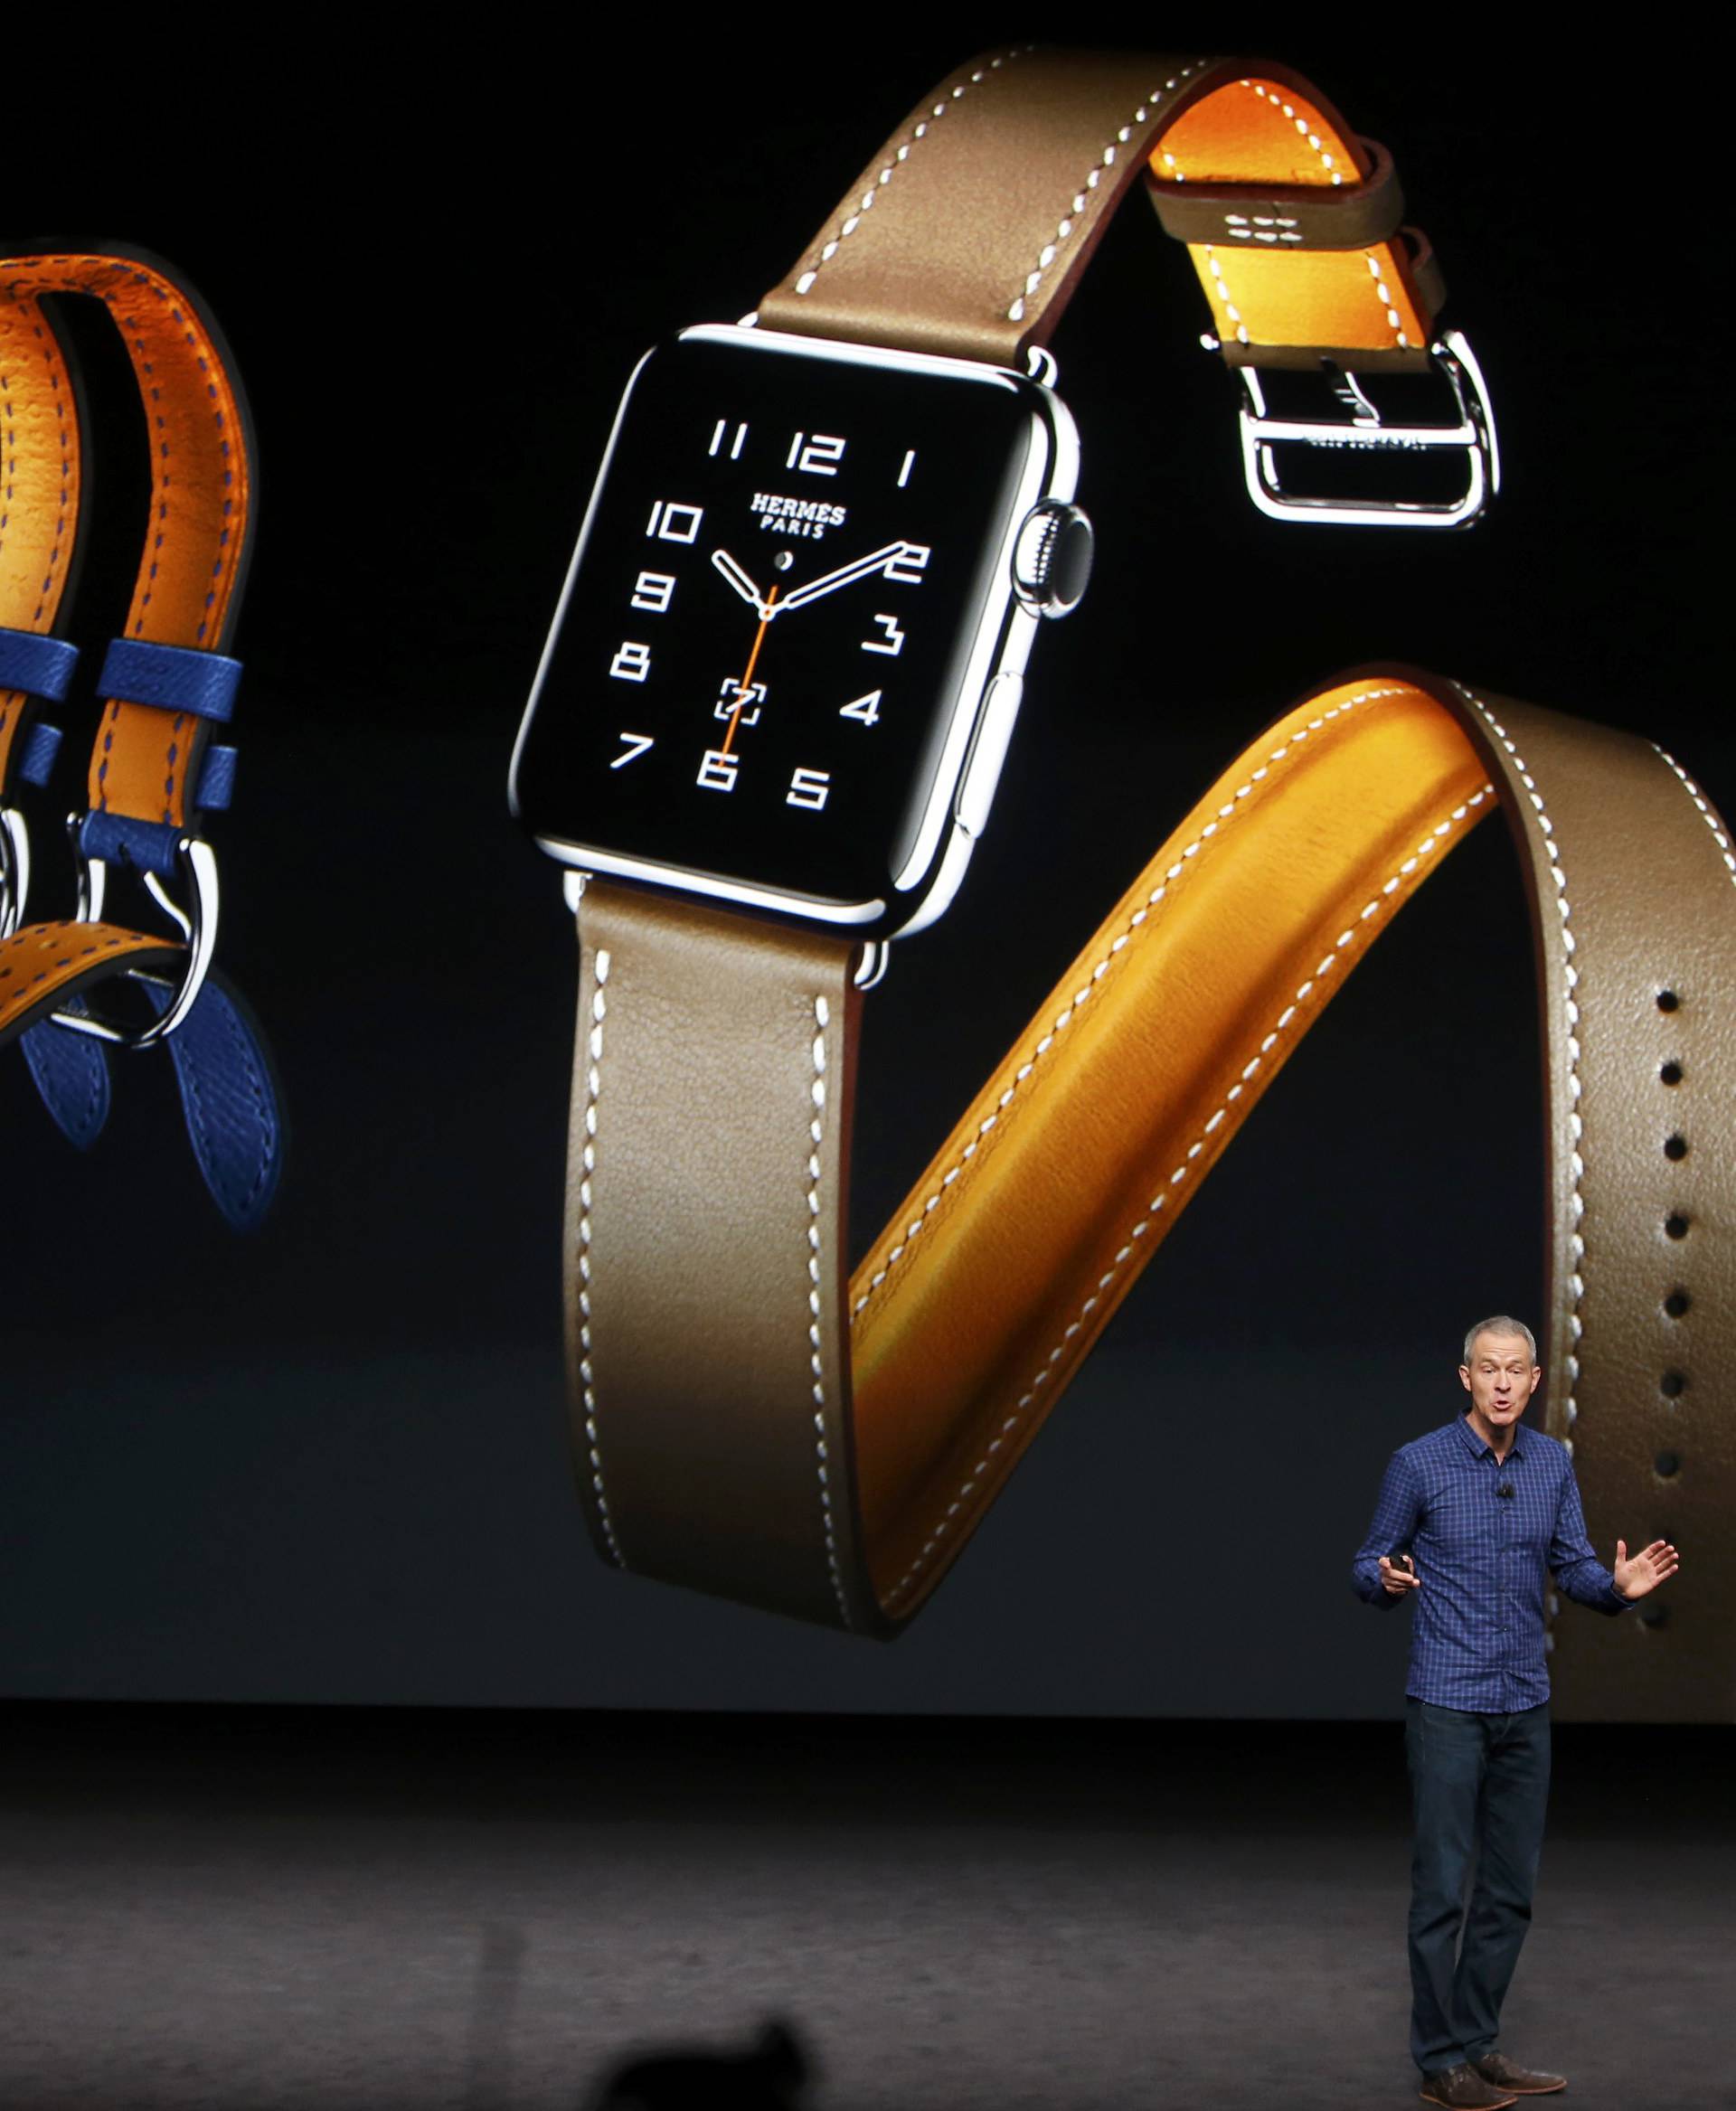 Jeff Williams discusses the Apple Watch Series 2 during an Apple media event in San Francisco